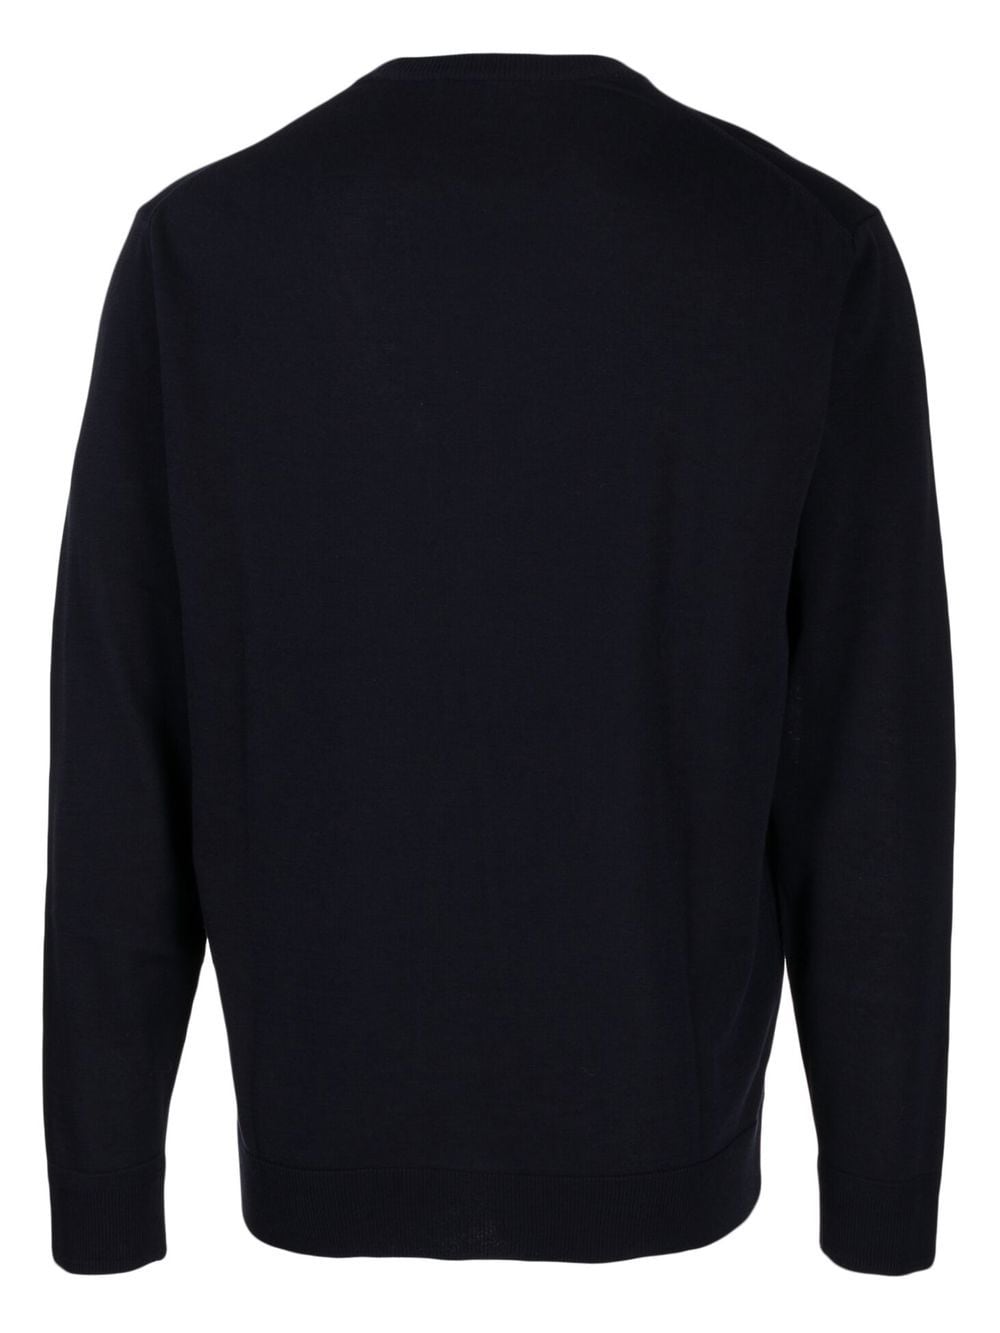 Shop Man On The Boon. Crew Neck Pullover Sweatshirt In Blue